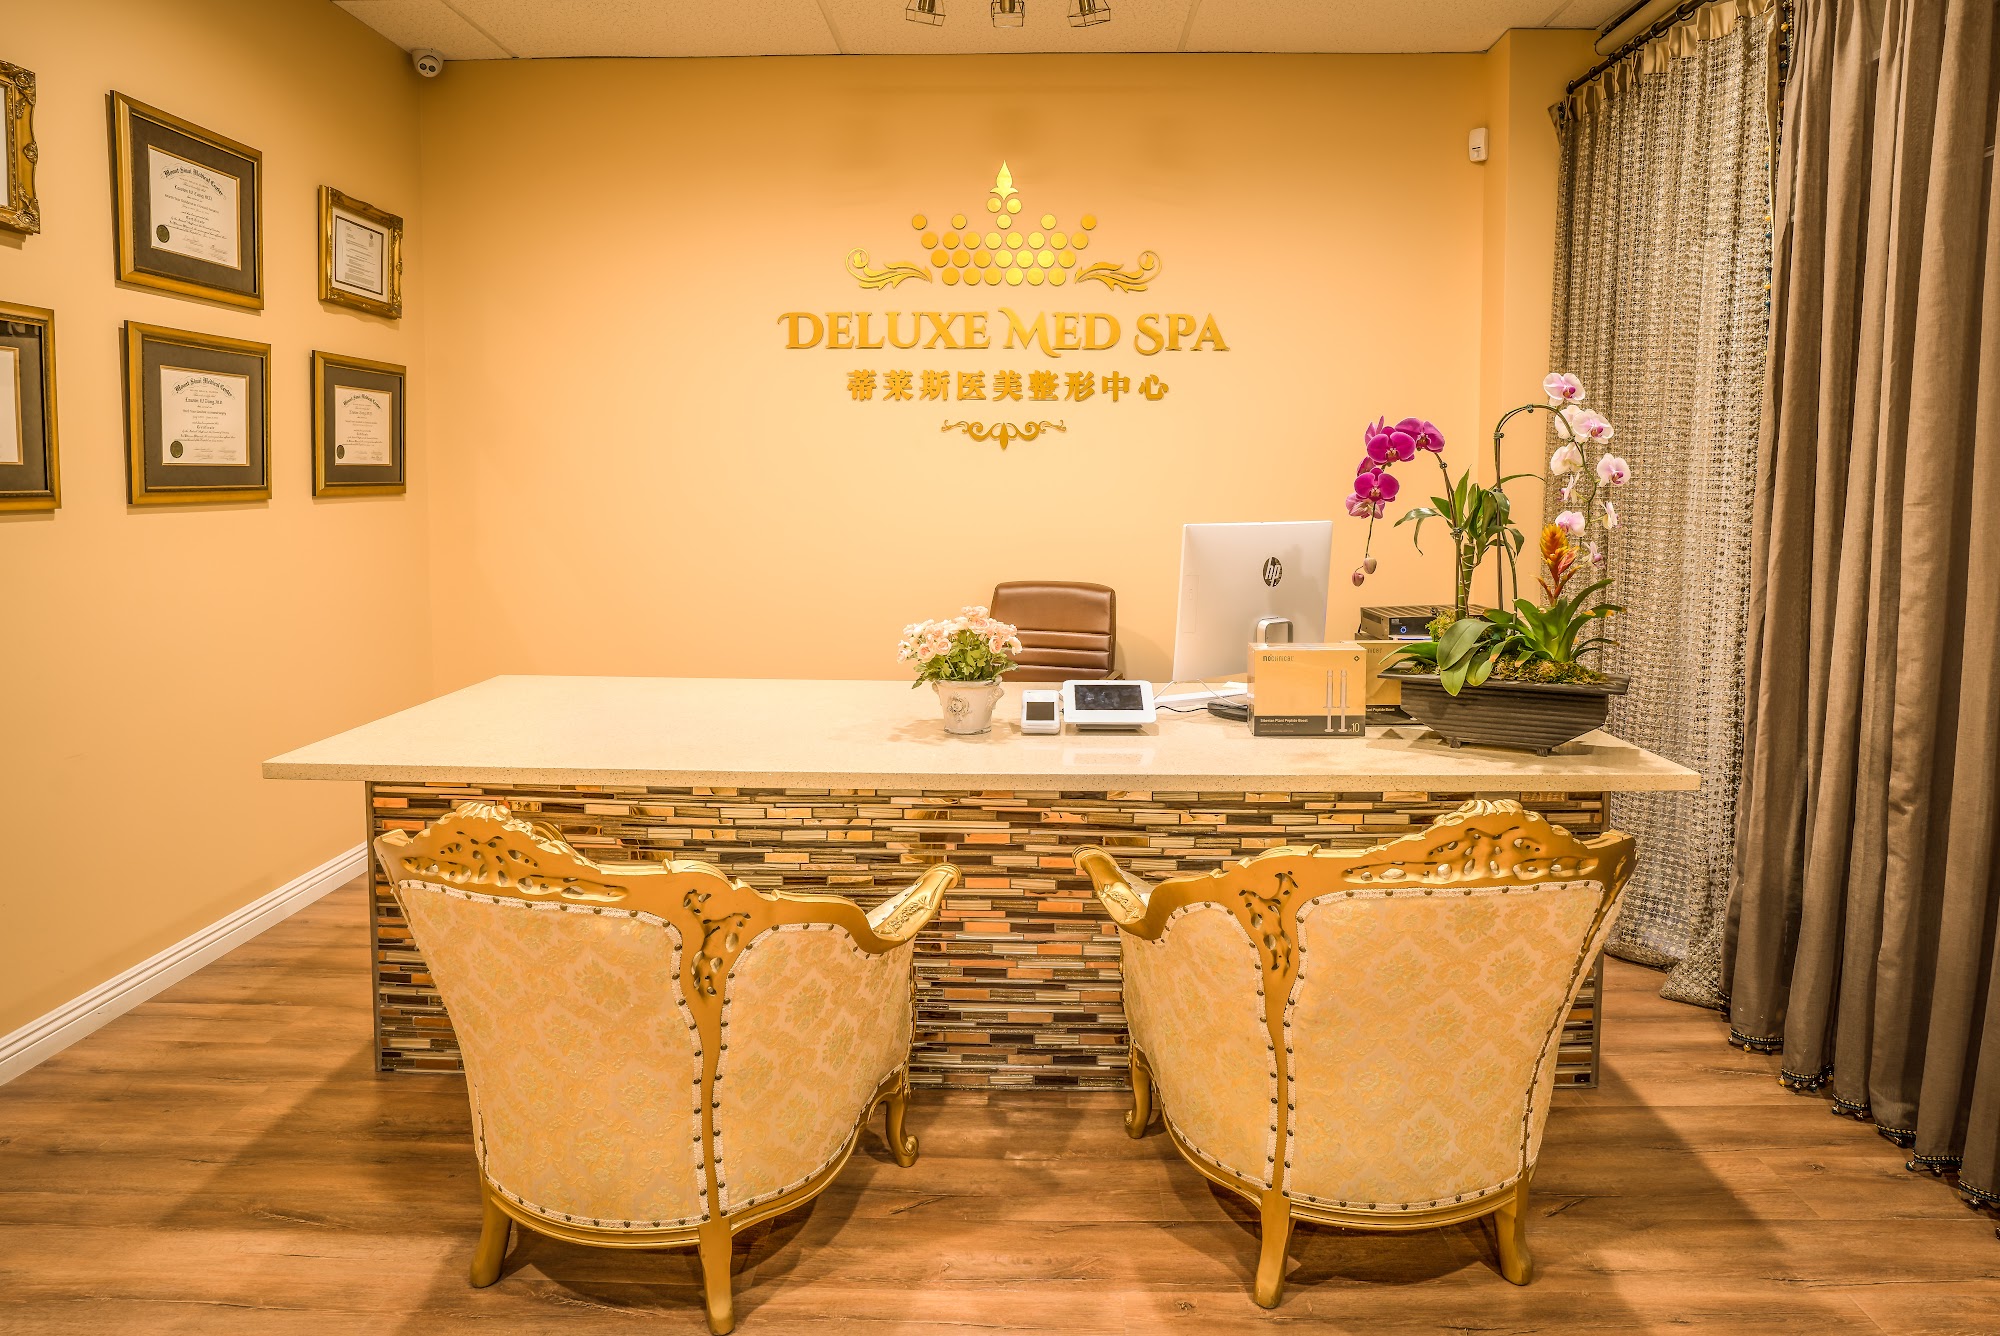 Deluxe Med Spa